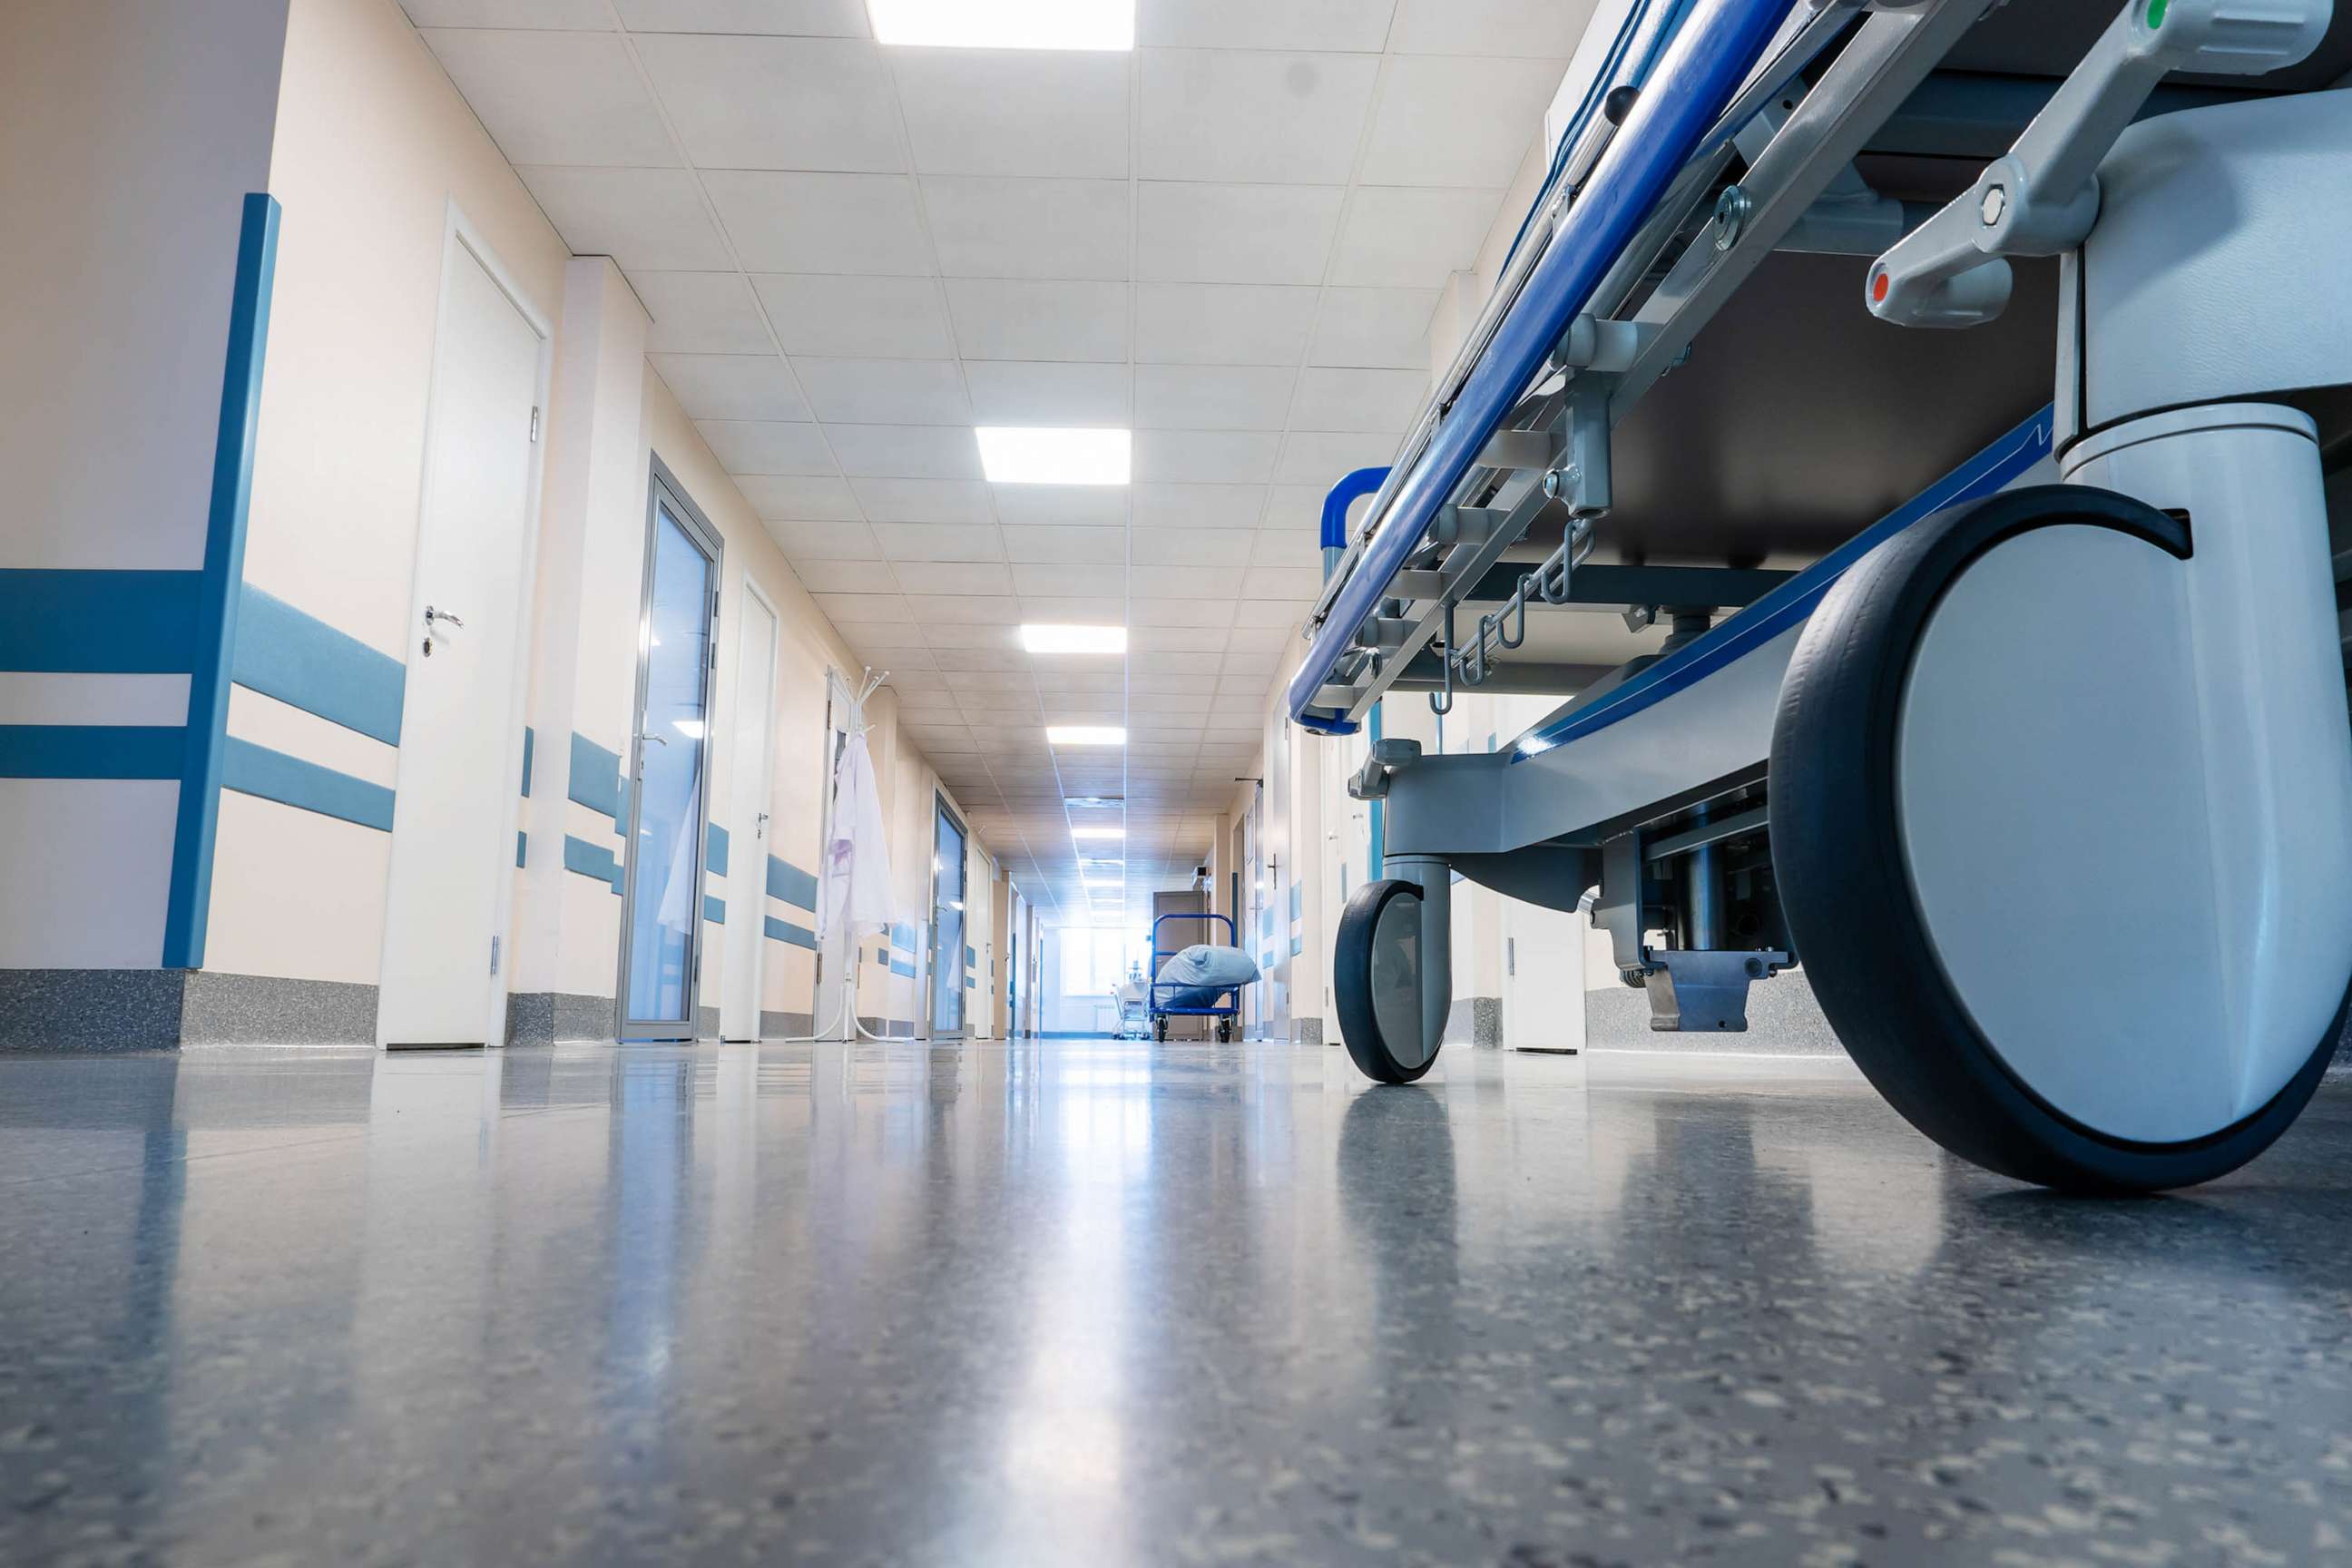 PHOTO: A medical bed on wheels is seen in the hospital corridor seen in this stock image.